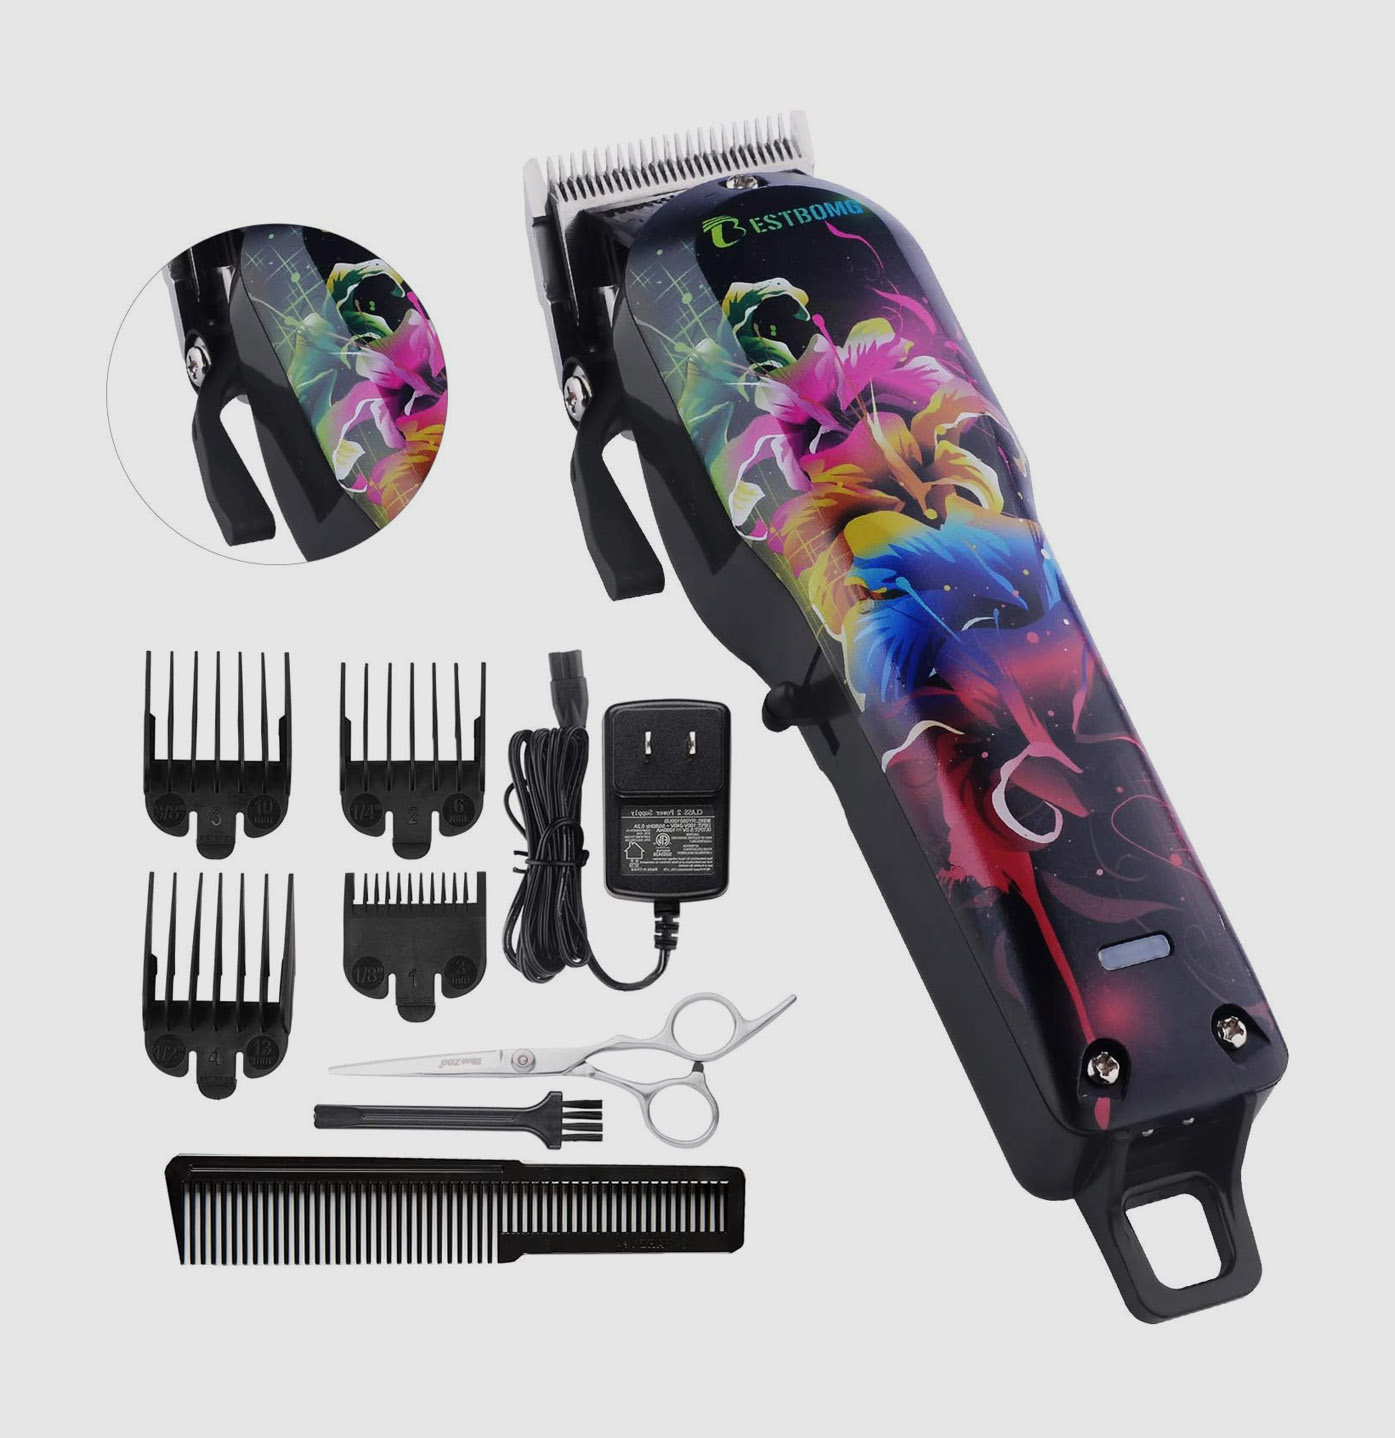 Pro Hair Clippers for Men Kids Baby - 0 